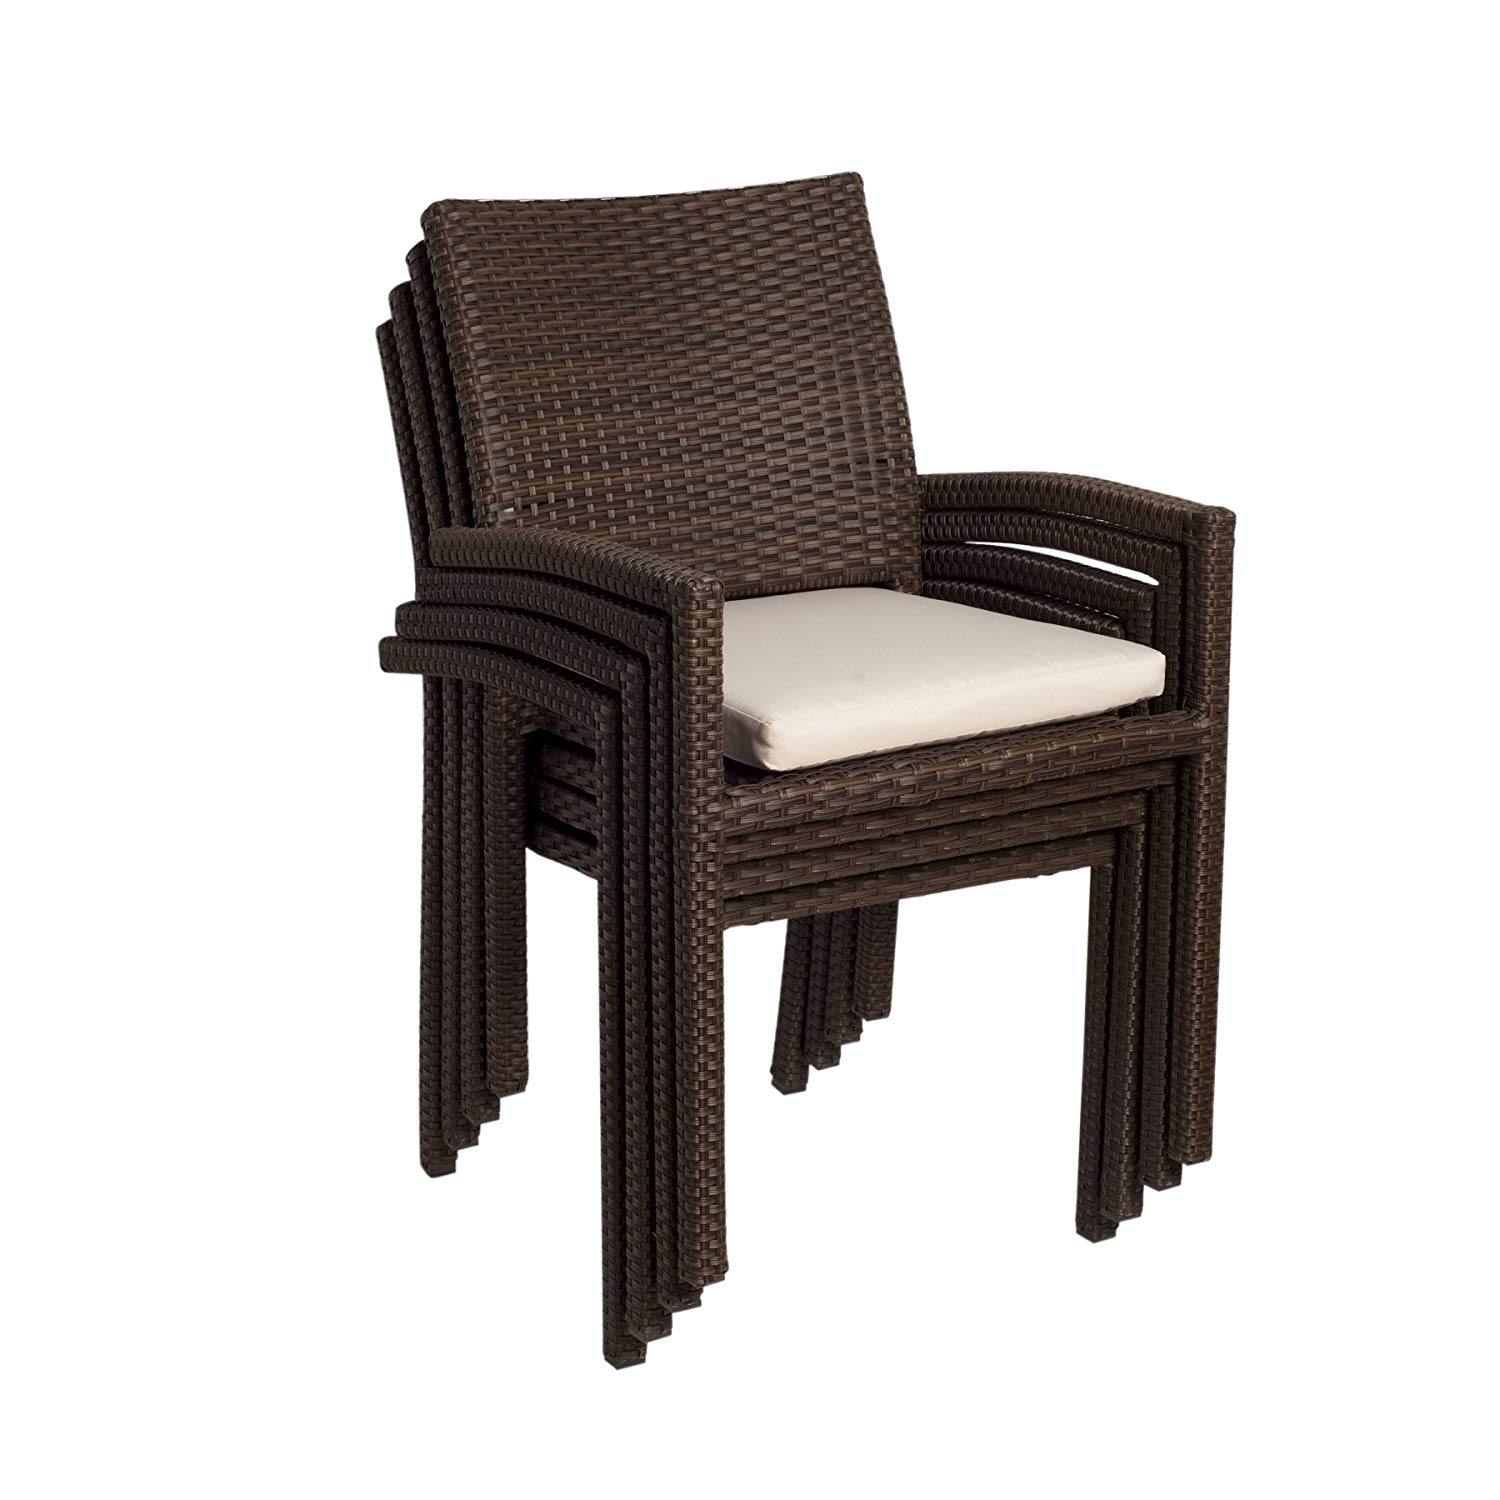 patio dining chairs amazon.com : atlantic liberty stackable armchairs, pack of 4 : patio dining WYBVEHV